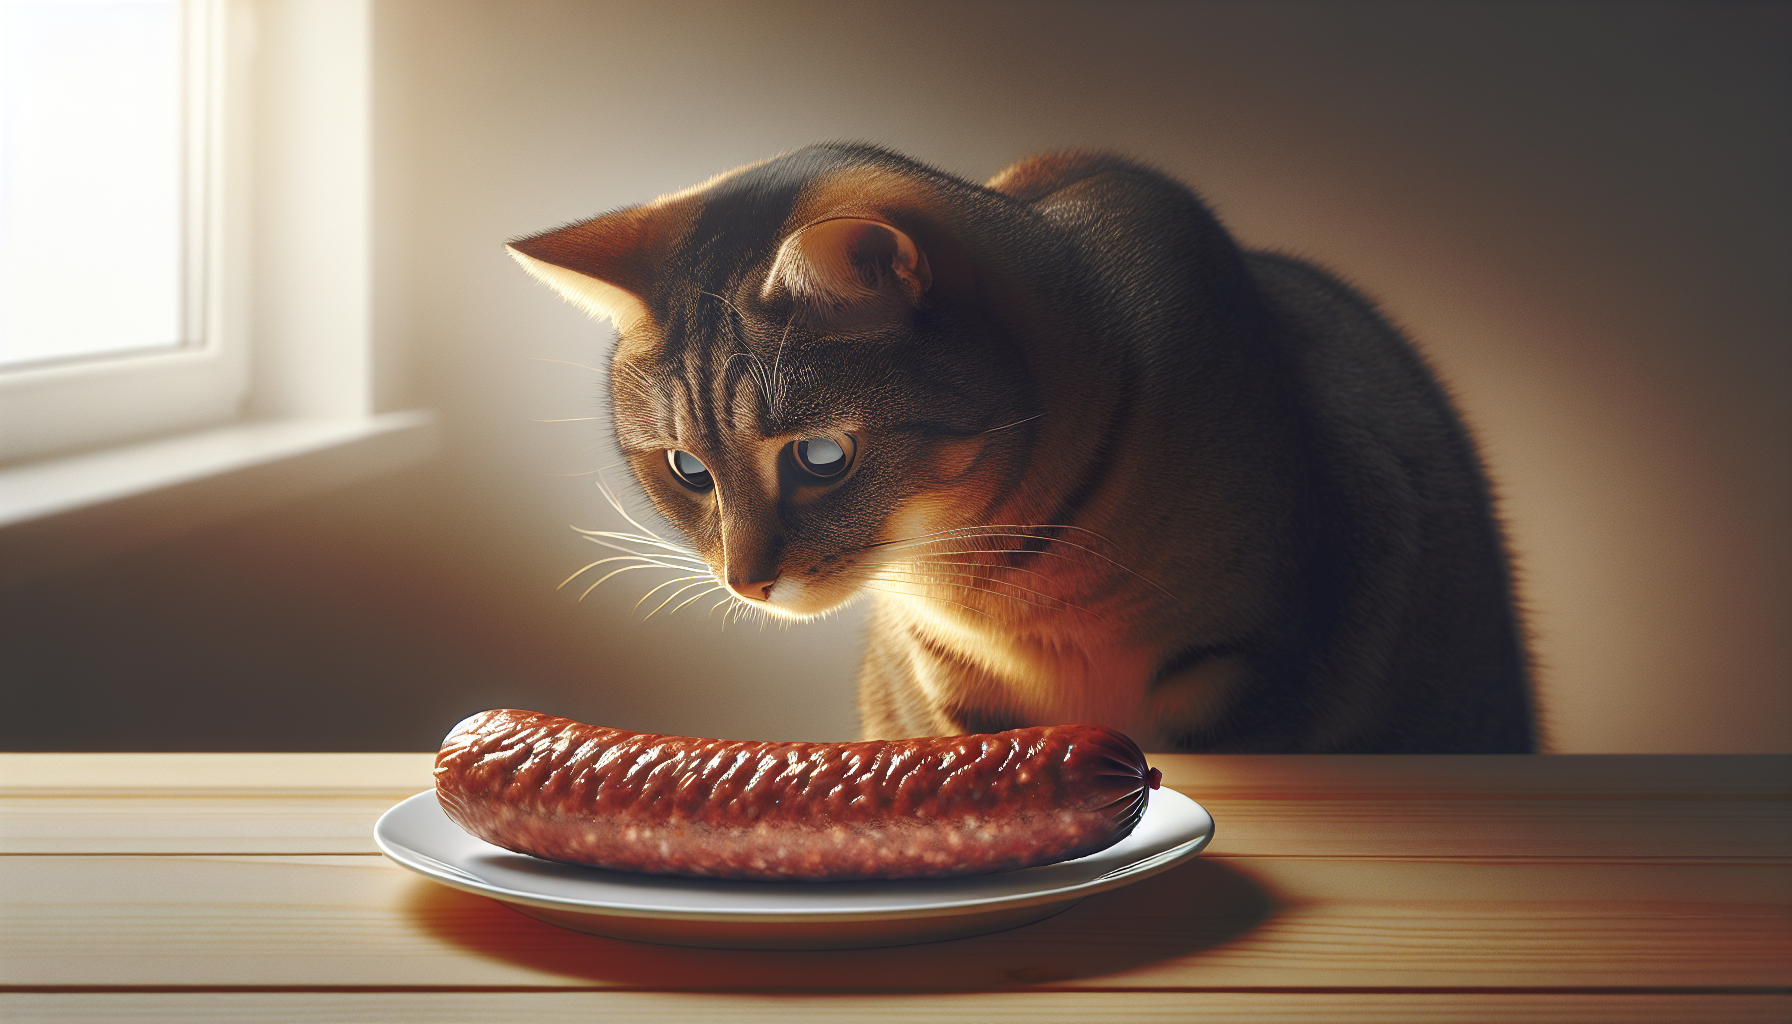 Can Cats Eat Sausage